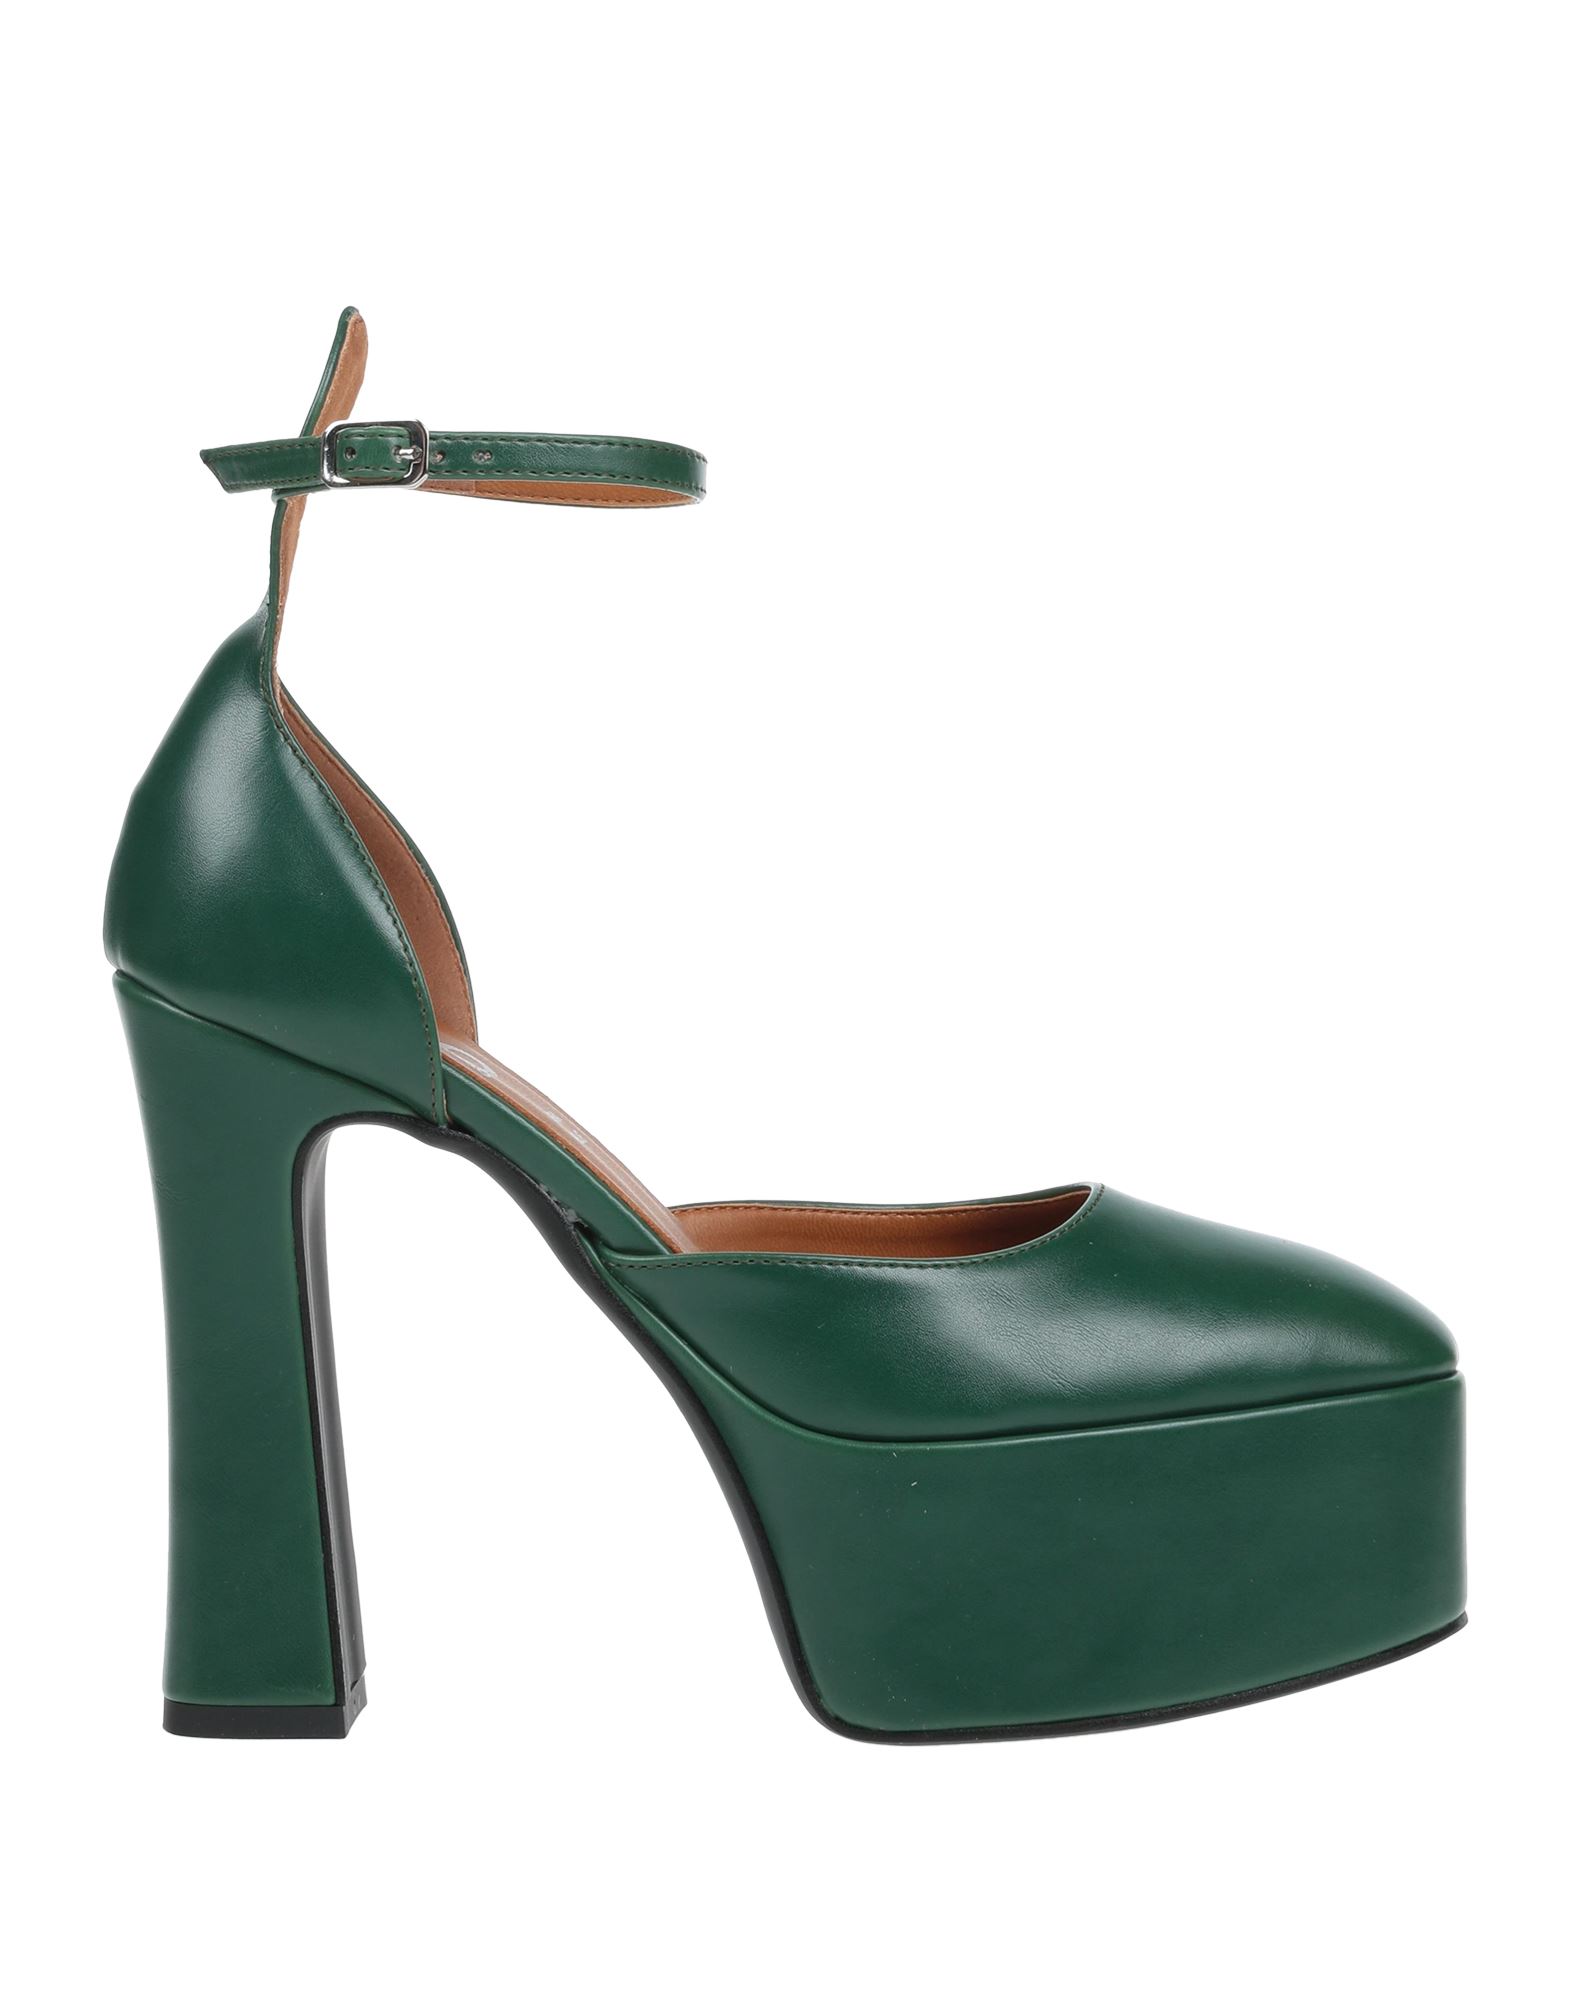 Islo Isabella Lorusso Pumps In Green